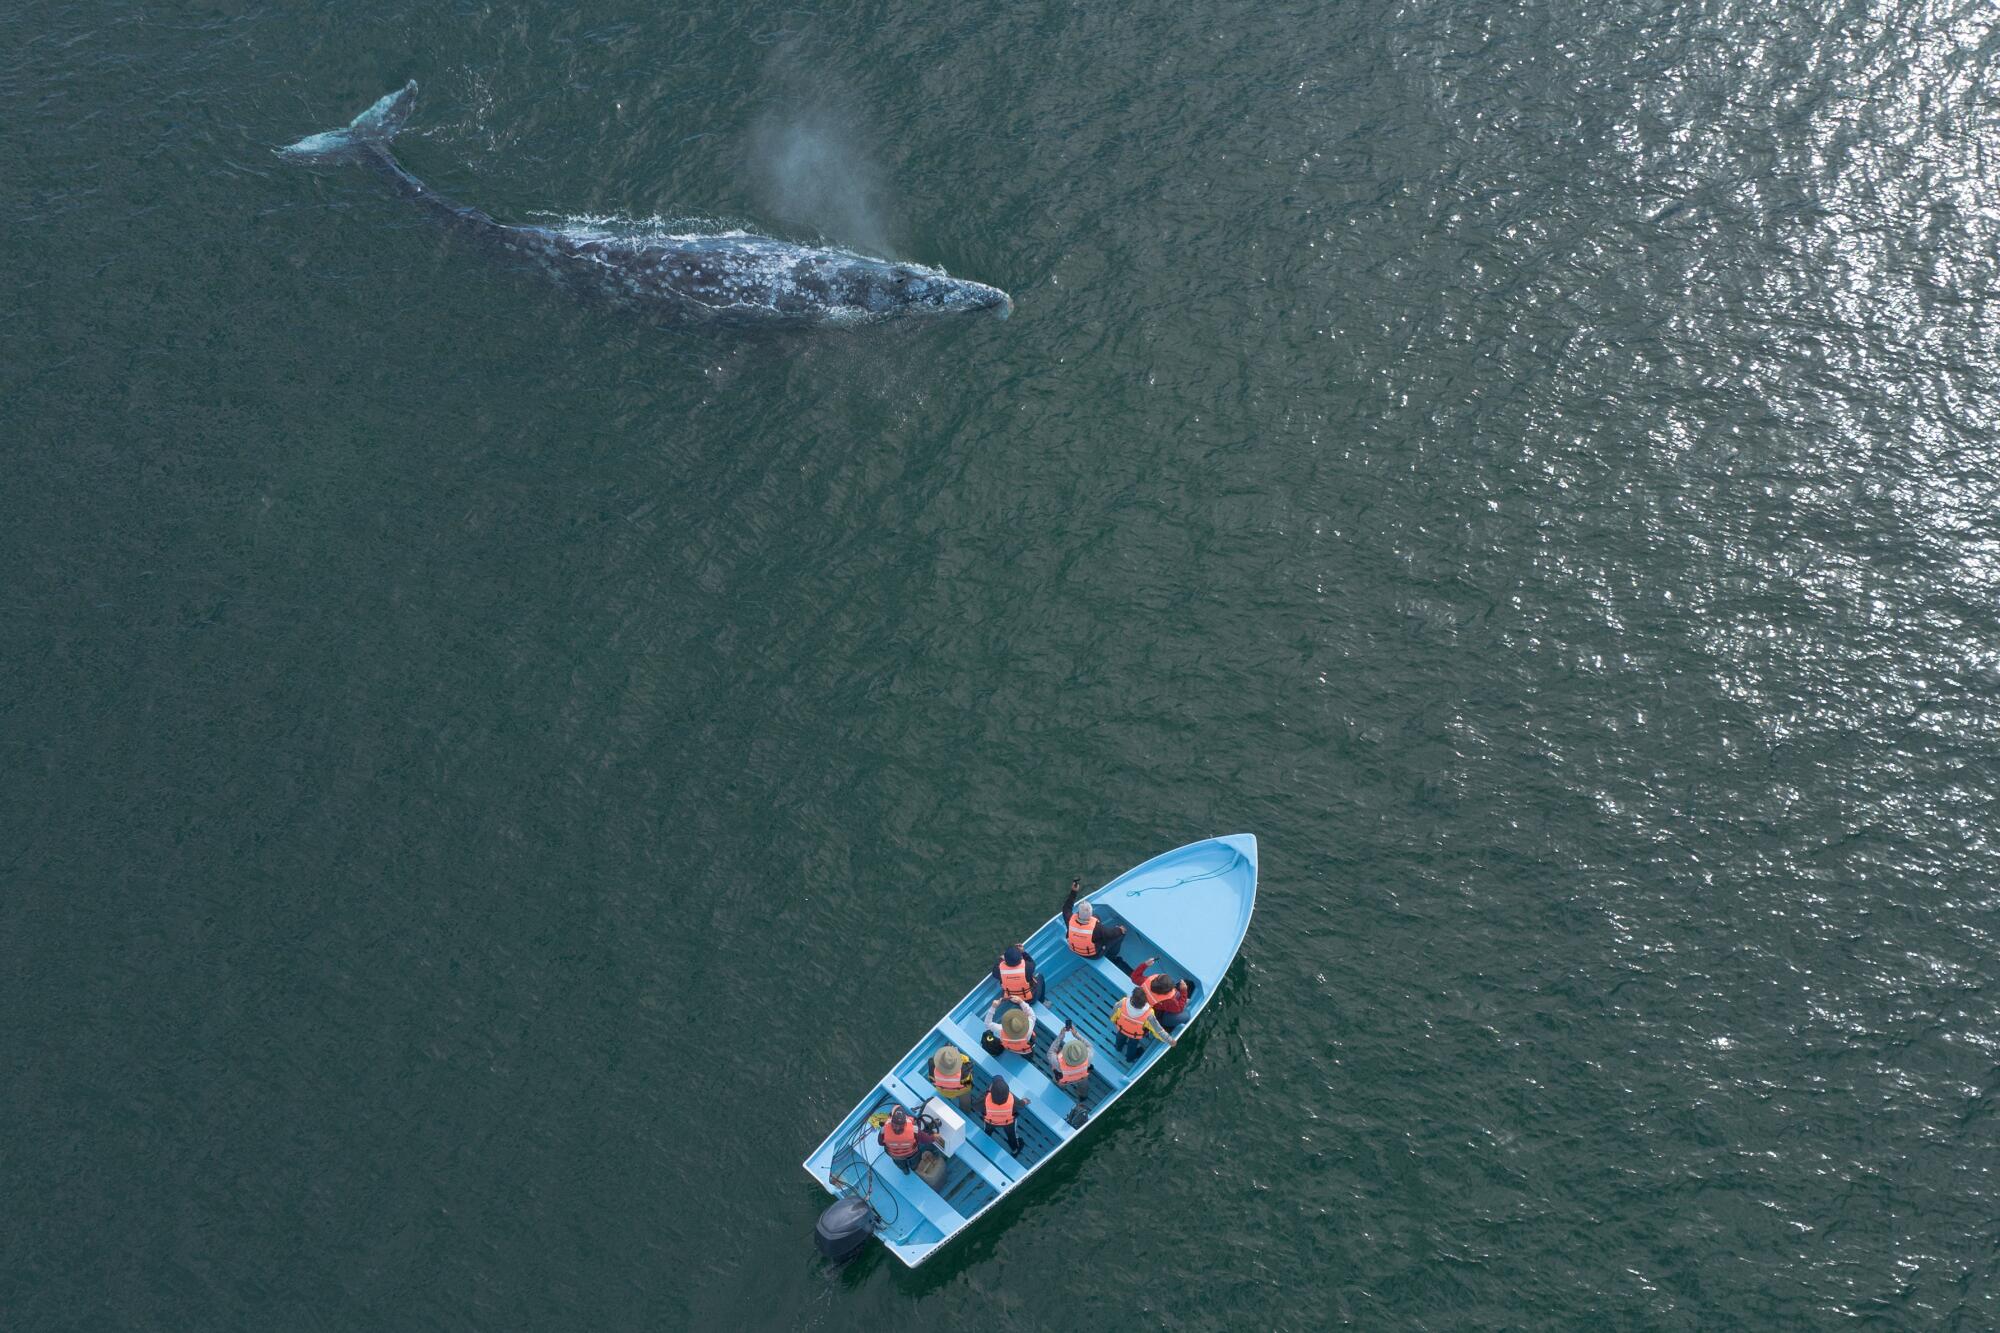 Tourists watch from a panga as a gray whale surfaces and spouts a misty jet of vapor at the Laguna Ojo de Liebre.